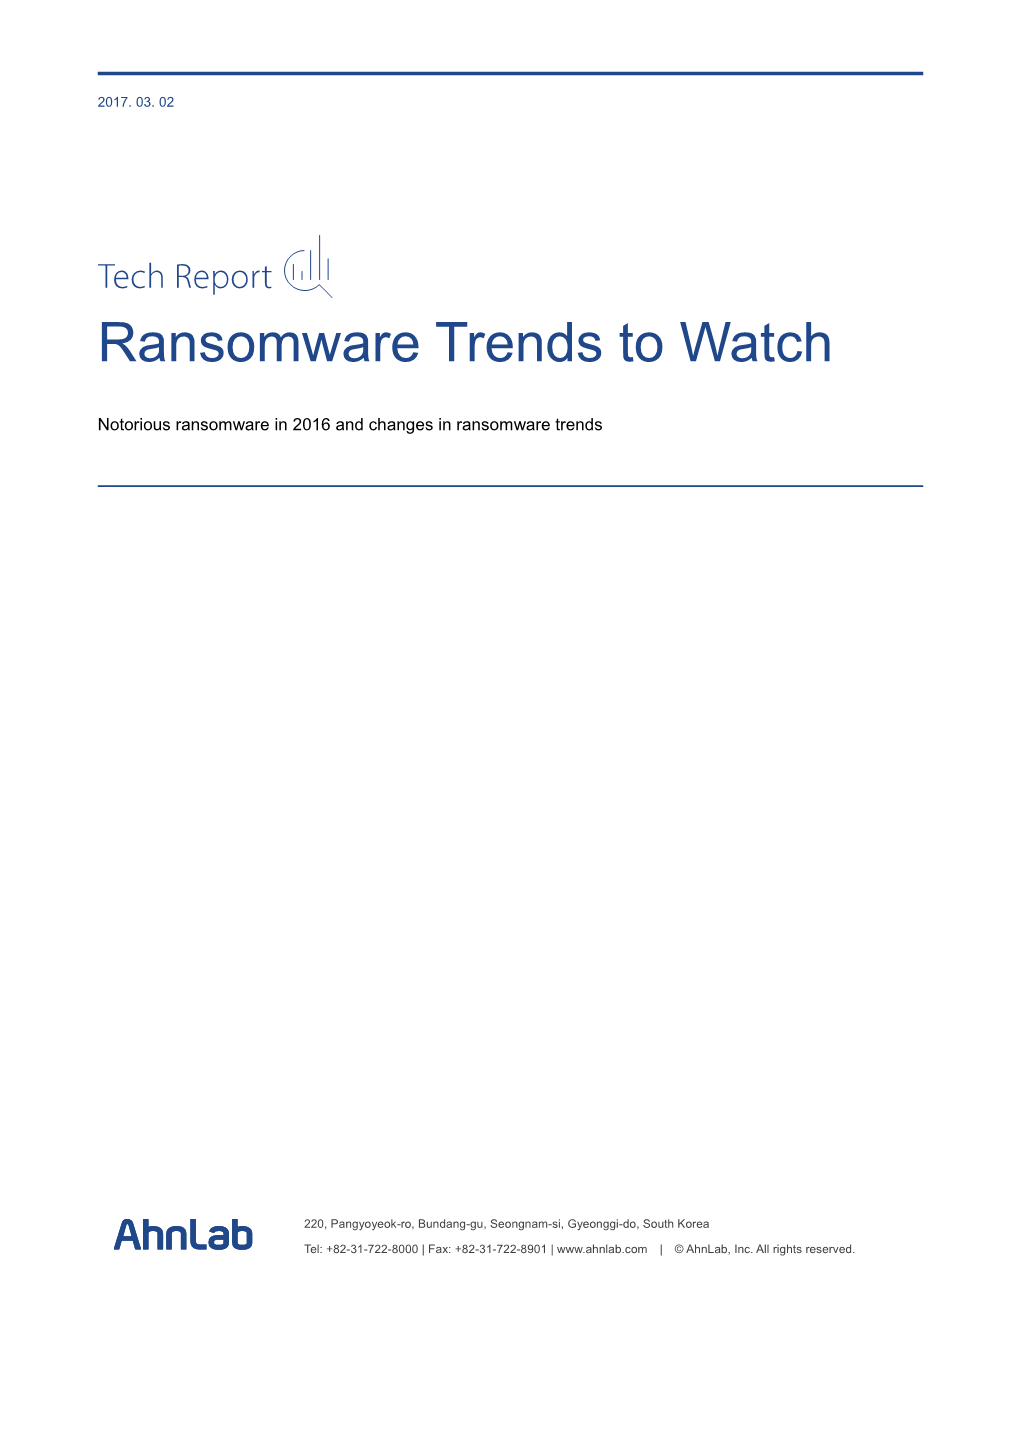 Ransomware Trends to Watch